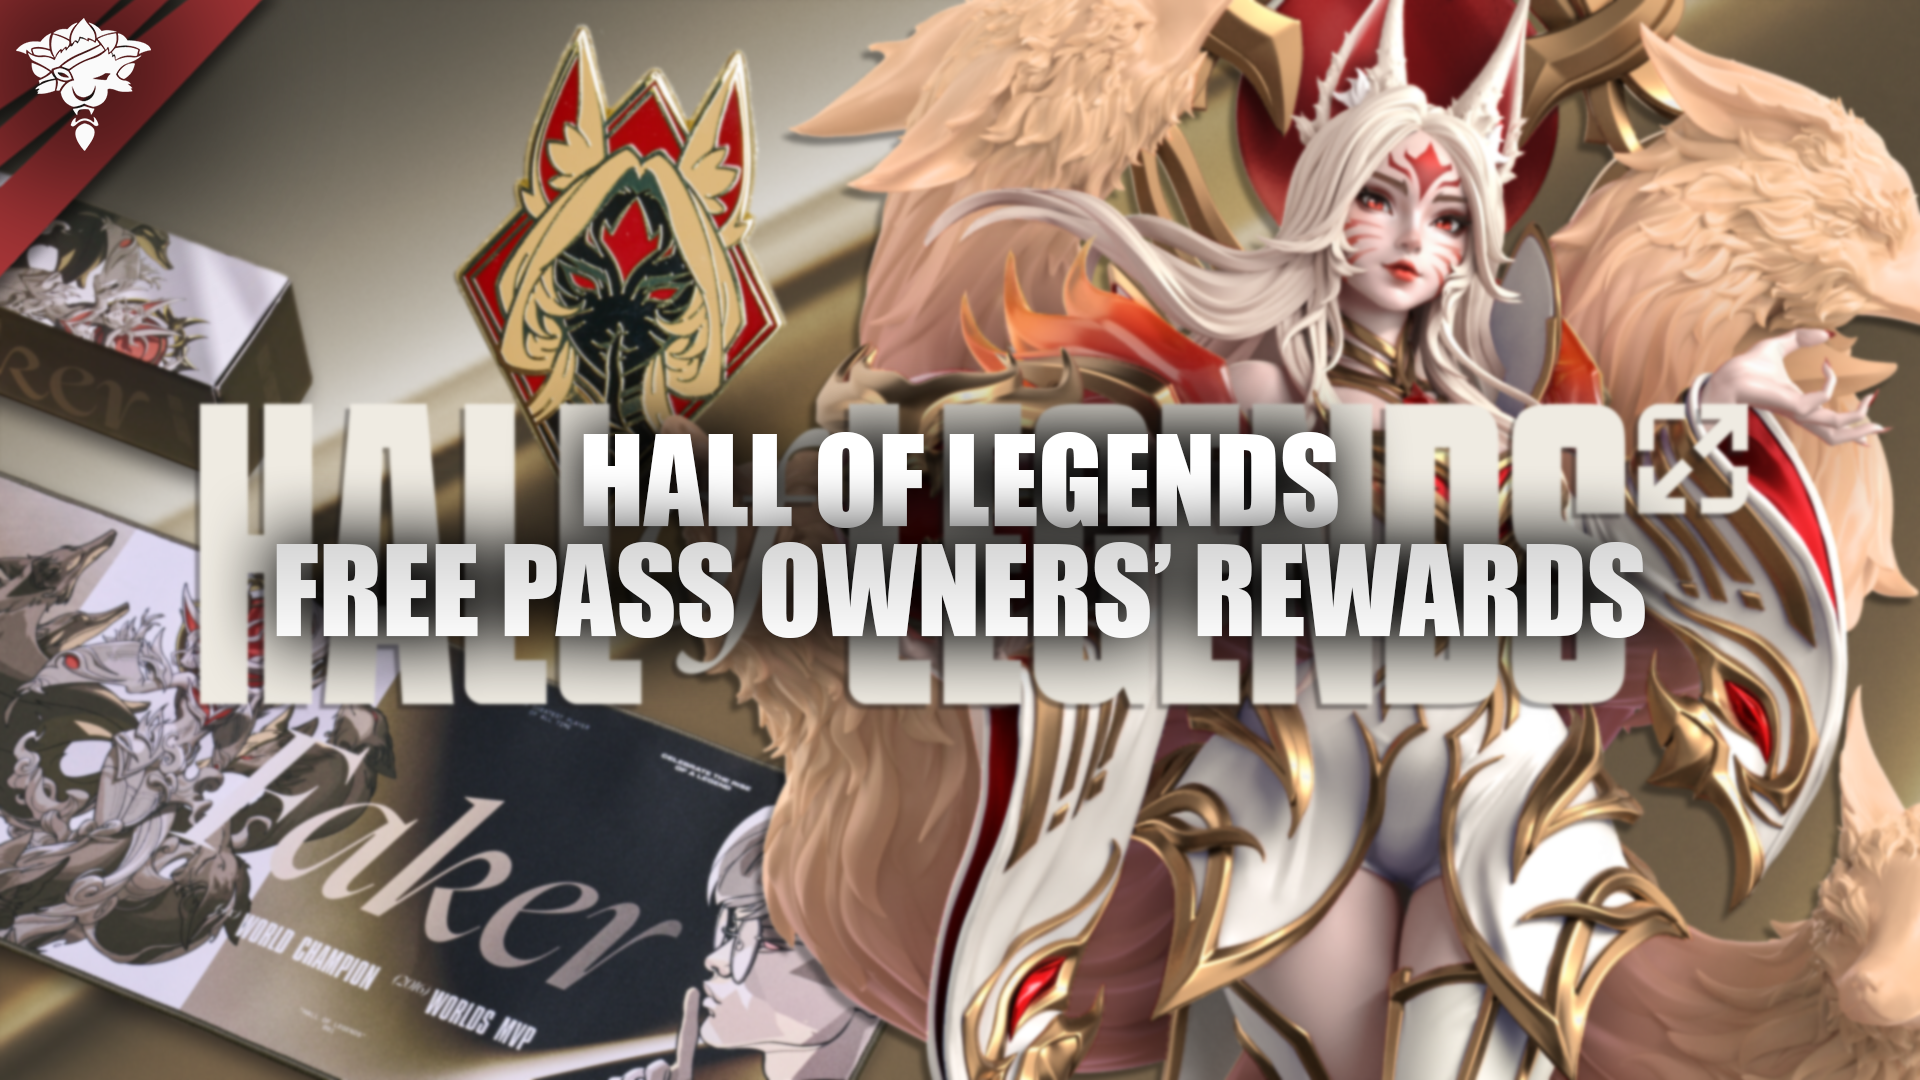 Hall of Legends Free Pass Owners’ Rewards